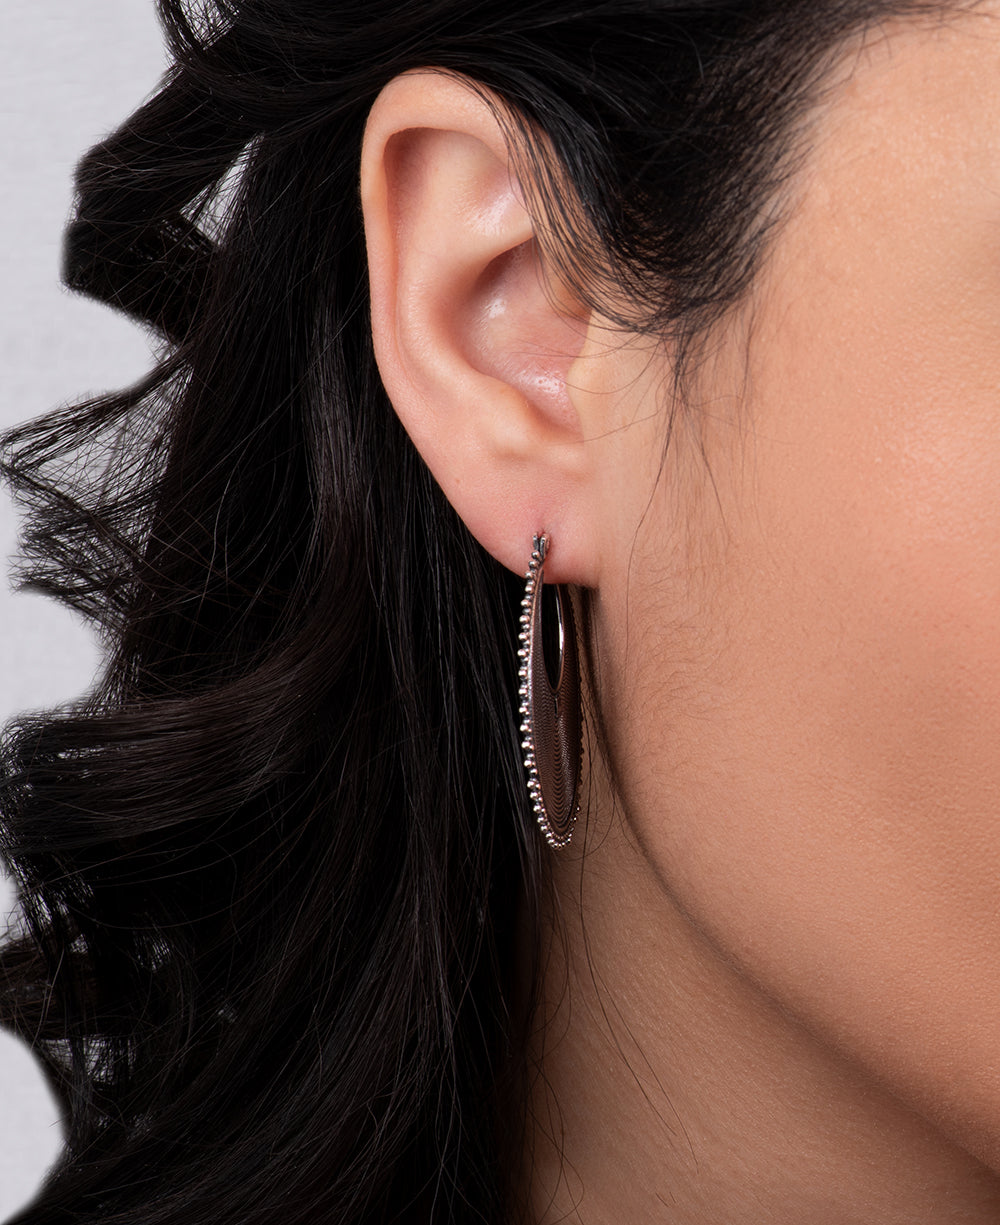 Bali crafted disc-shaped silver earrings